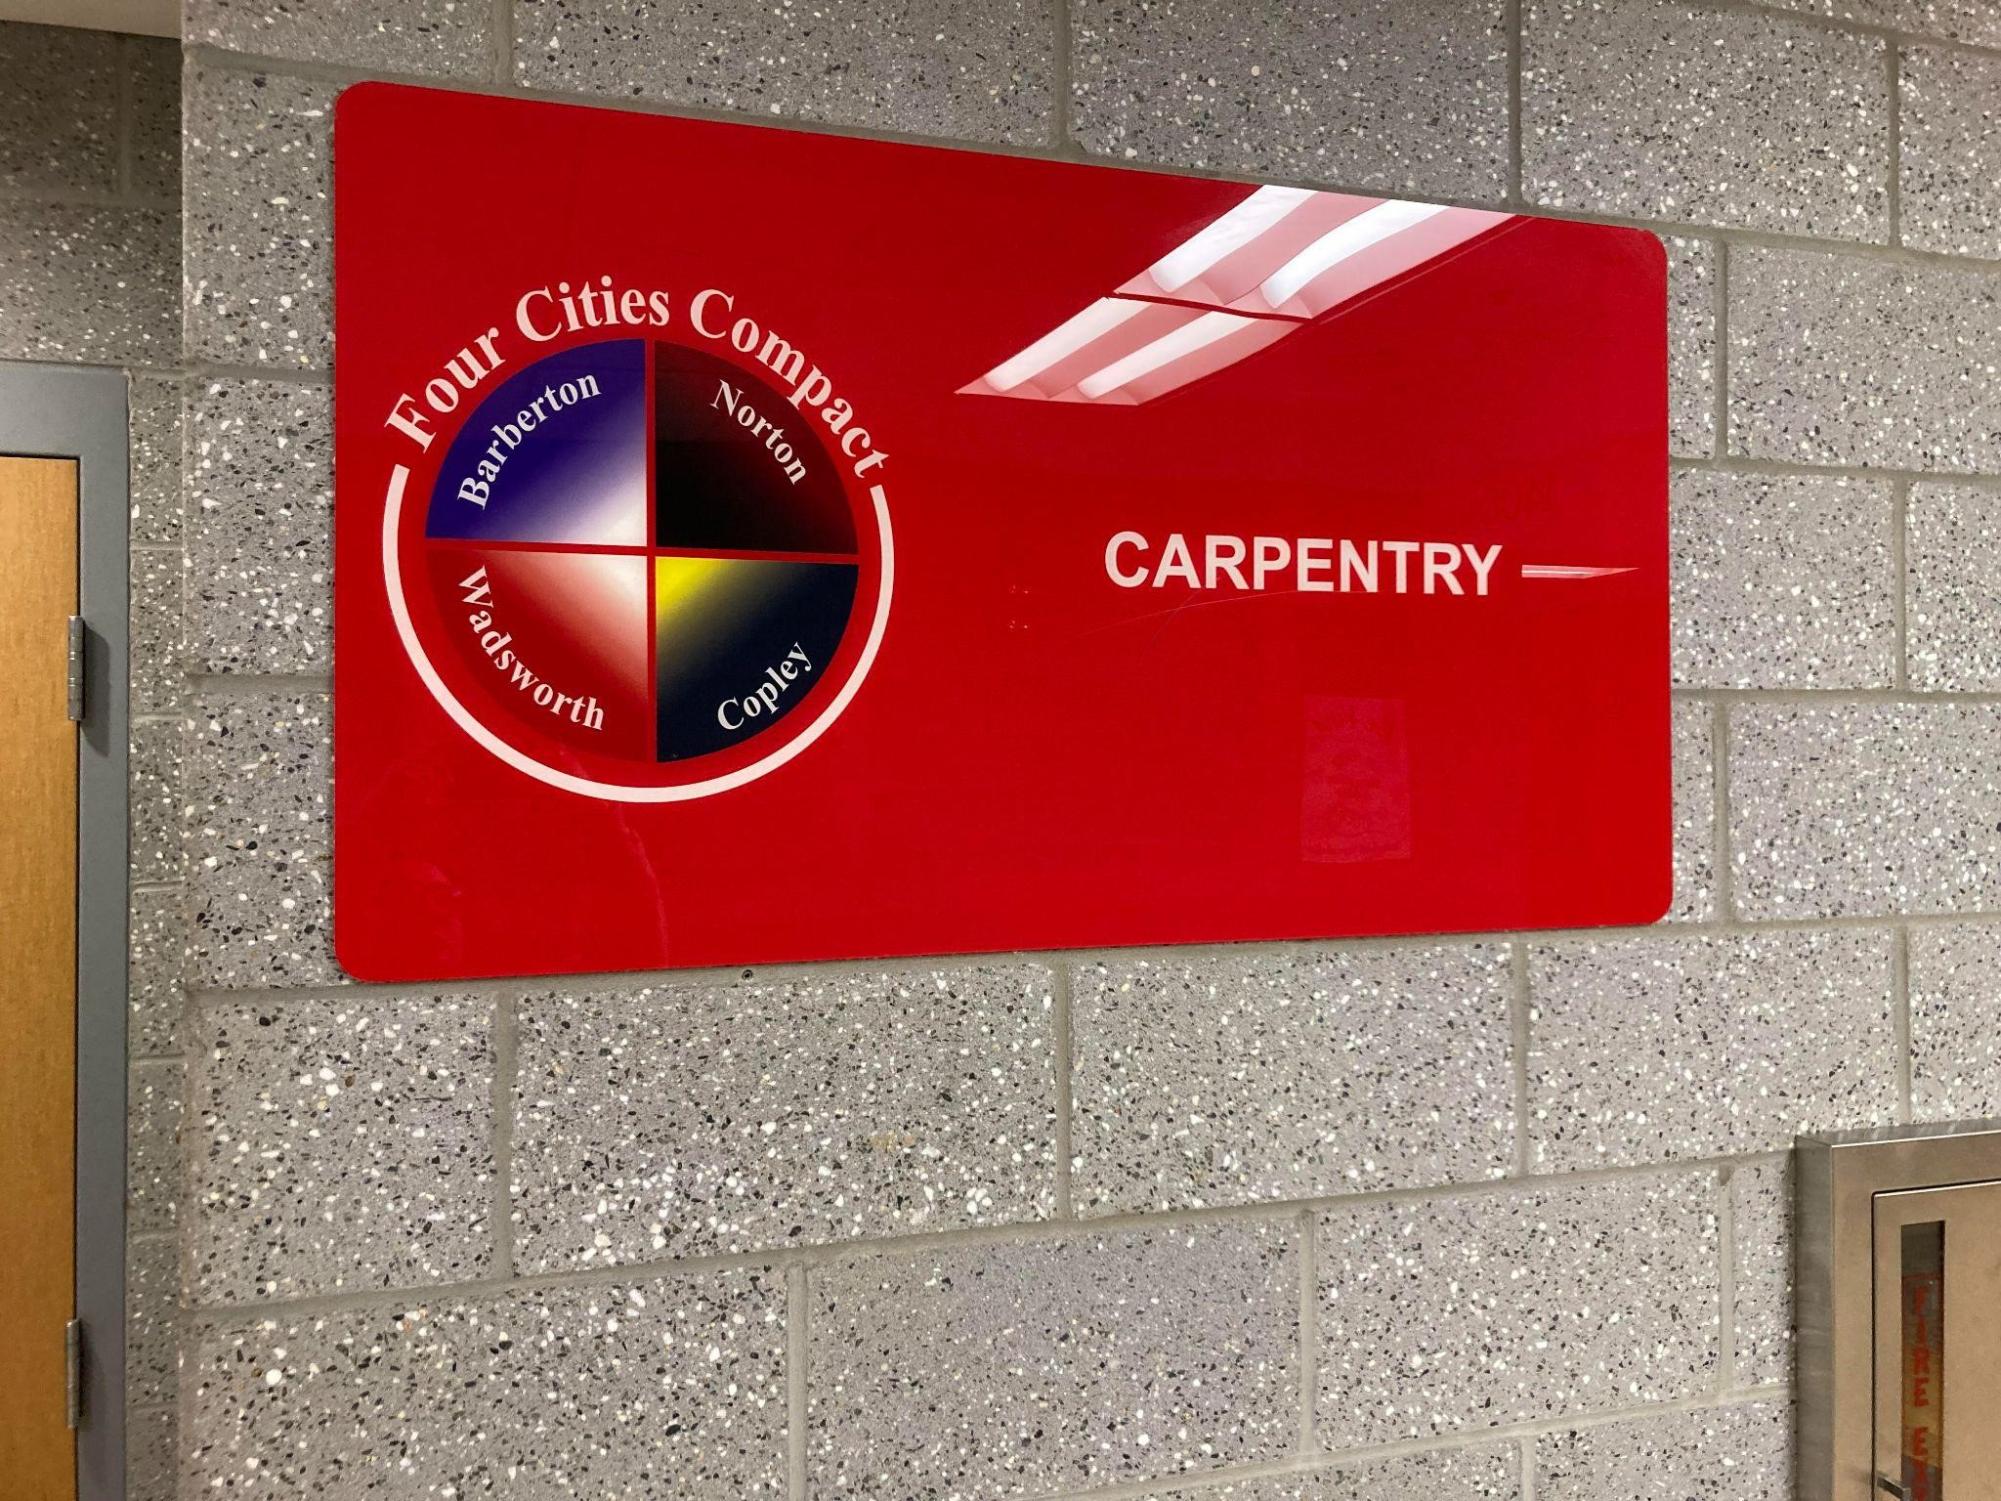 Michael Horvat is set to head the Four Cities Compact Carpentry Program hosted at Wadsworth High School. He will start with students tomorrow, November 29. Photo by Haley Reedy.